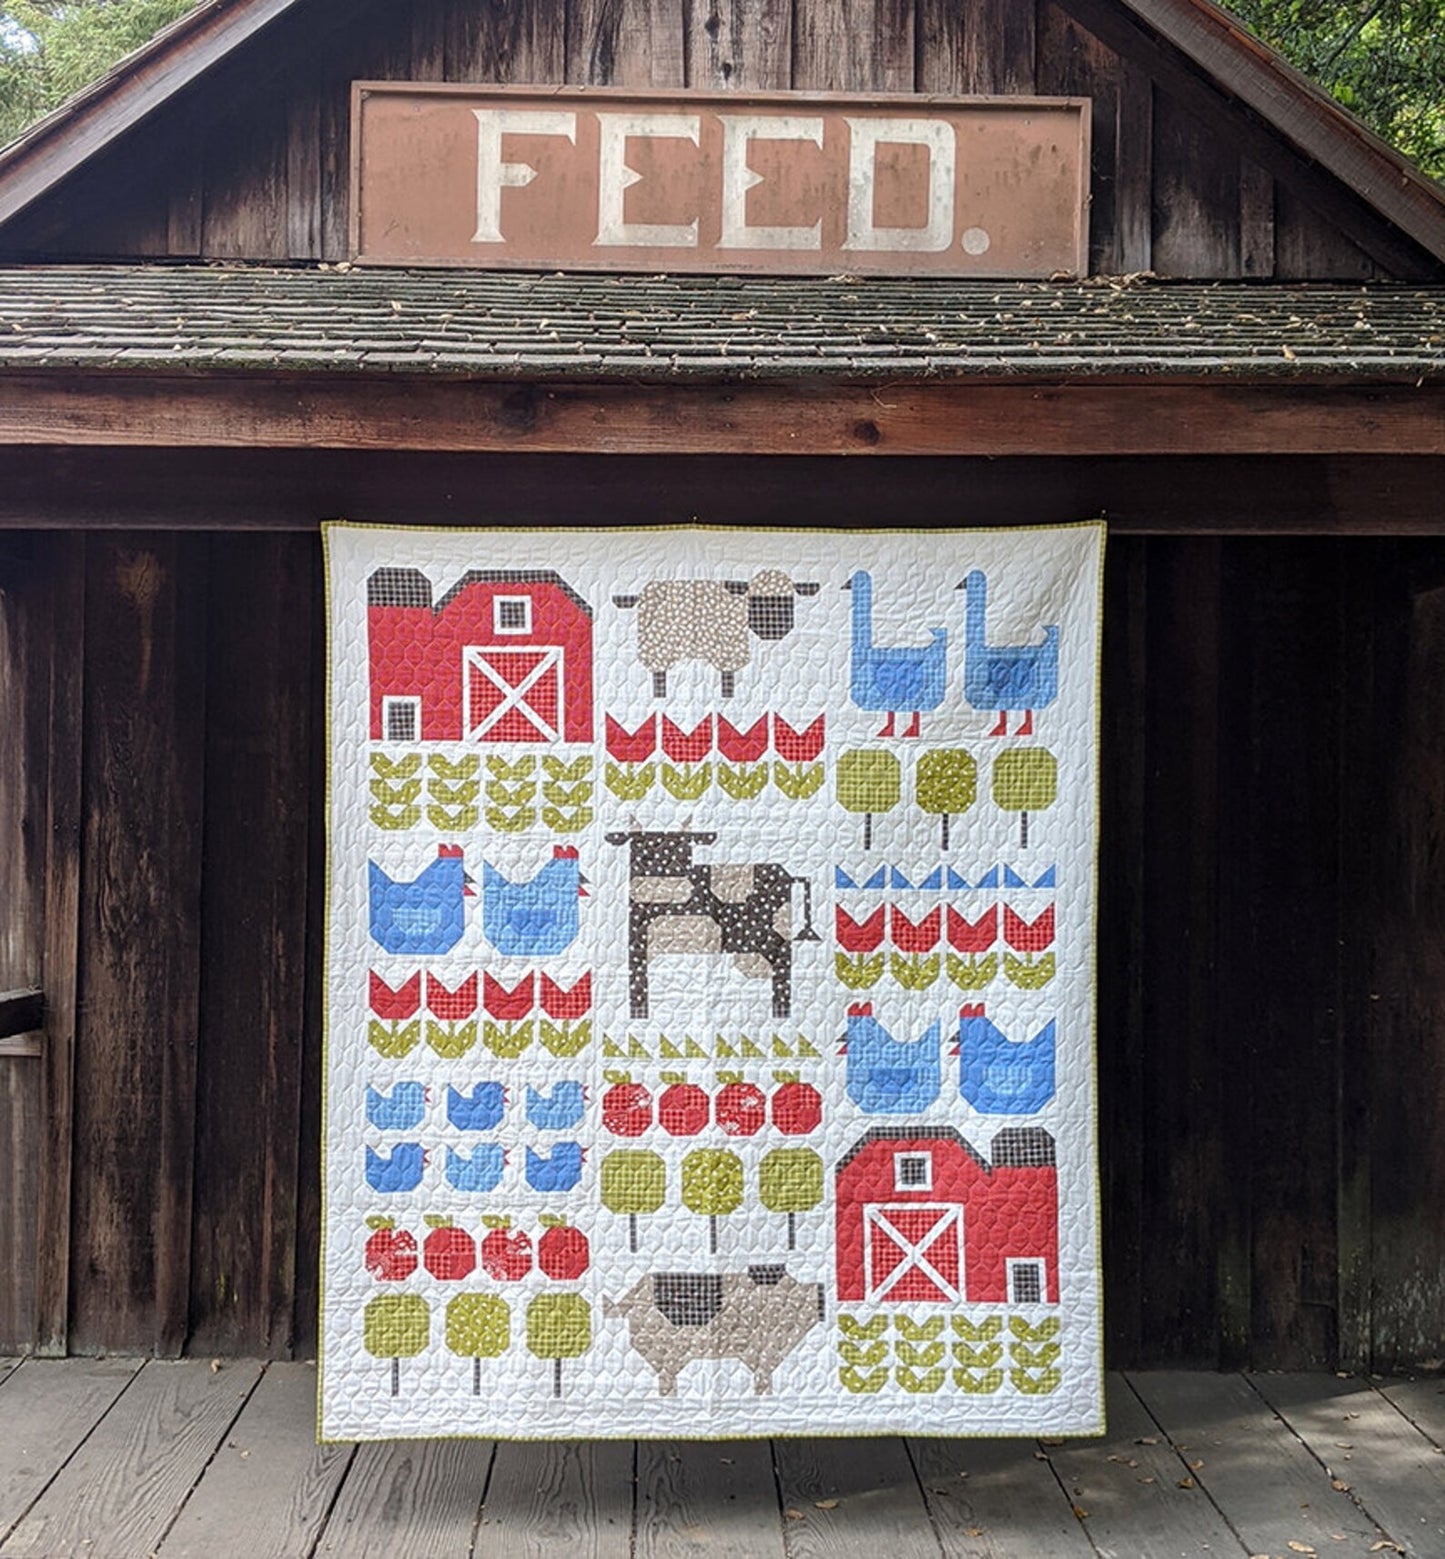 And On The Farm Quilt Pattern by Stacy Iest Hsu